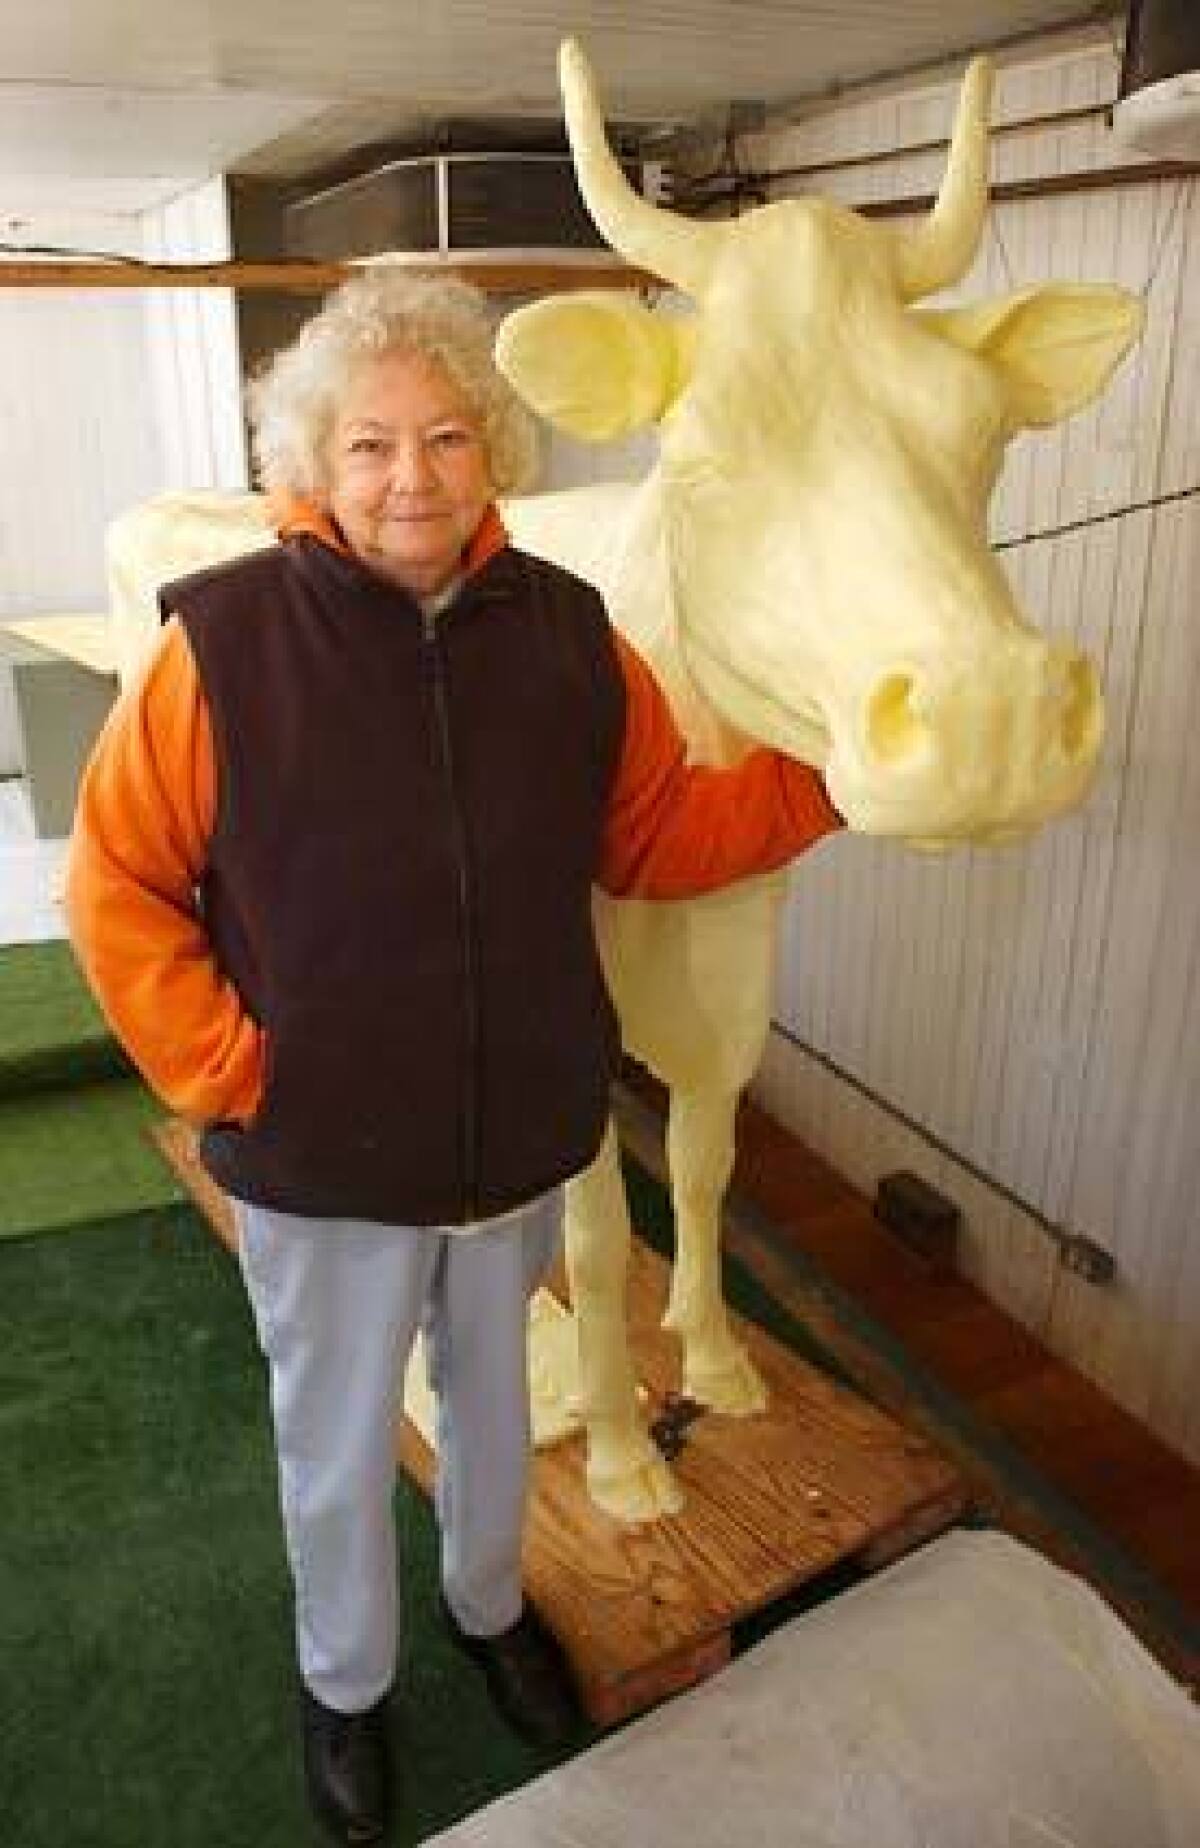 Norma "Duffy" Lyon was best known for carving life-size dairy cows out of butter.